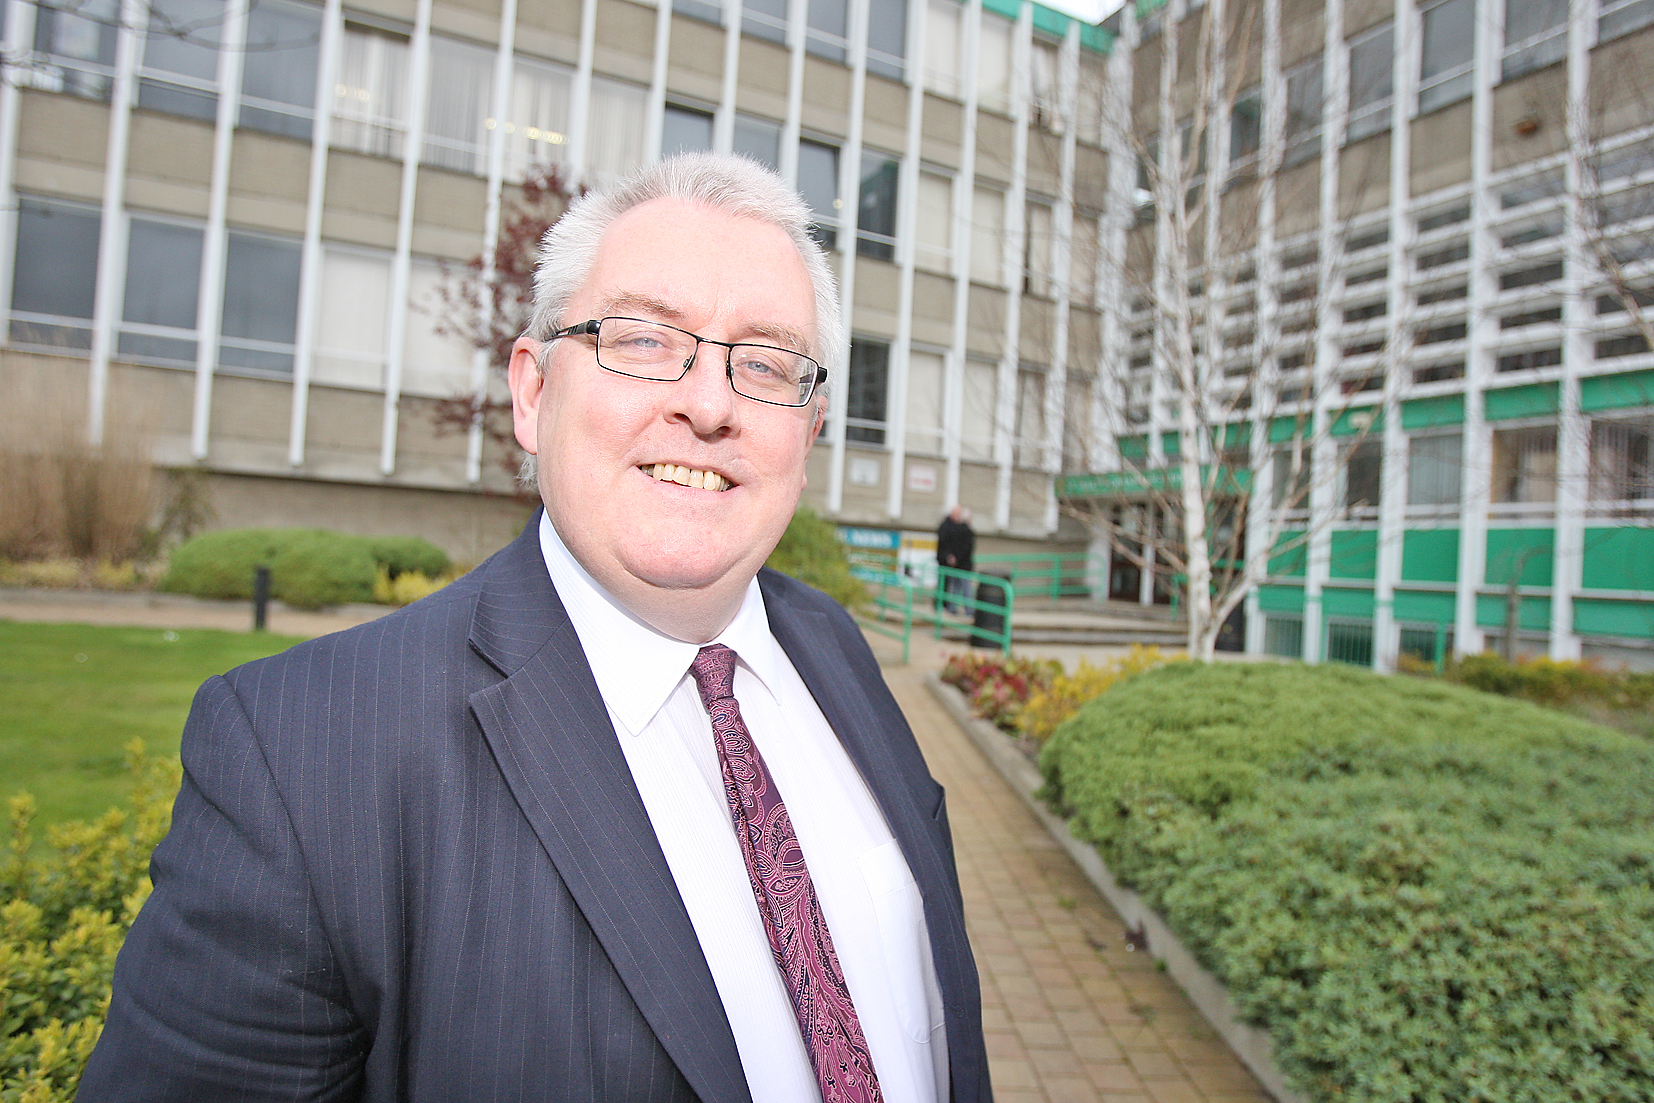 Professor Pól Ó Dochartaigh during a visit to his alma mater, St Mary’s Grammar School. He says students, parents and career advisers should take a new look at studying in the south   